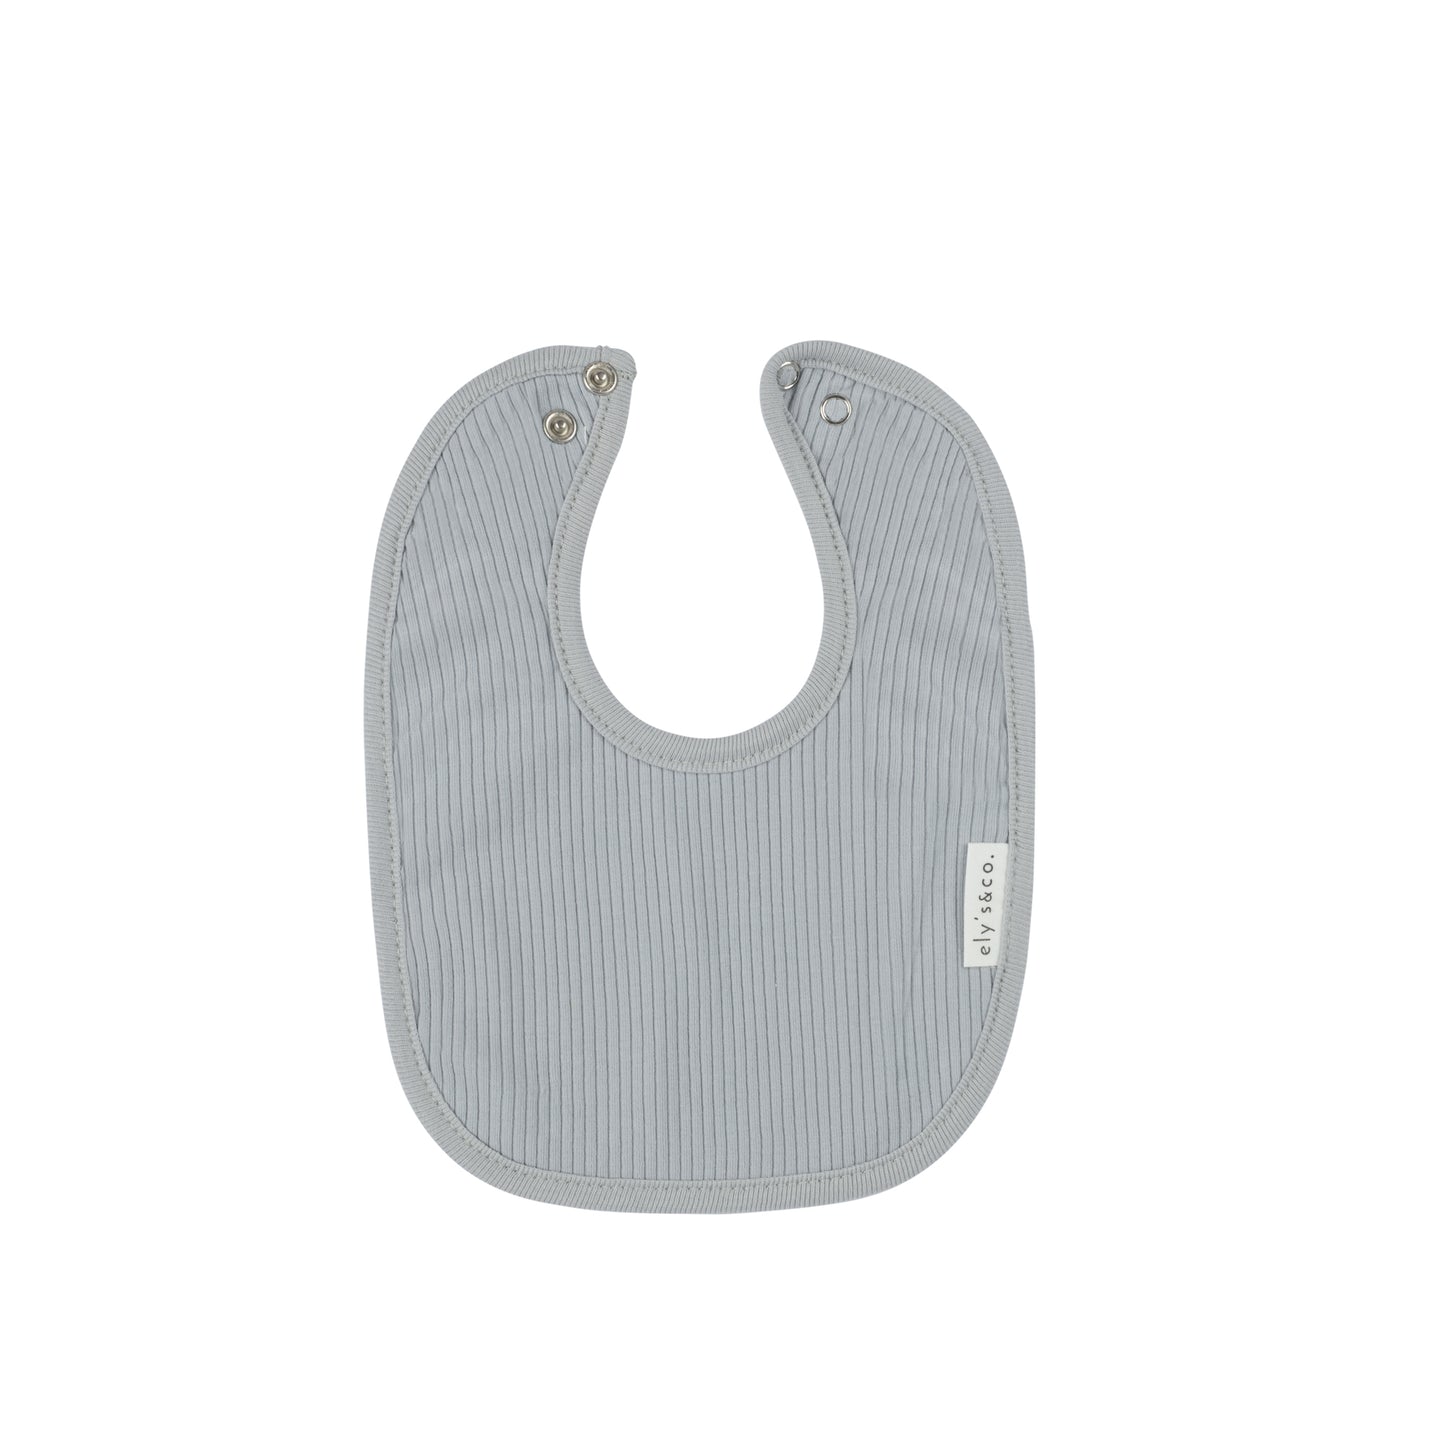 Ely's & Co. Solid Ribbed Bibs